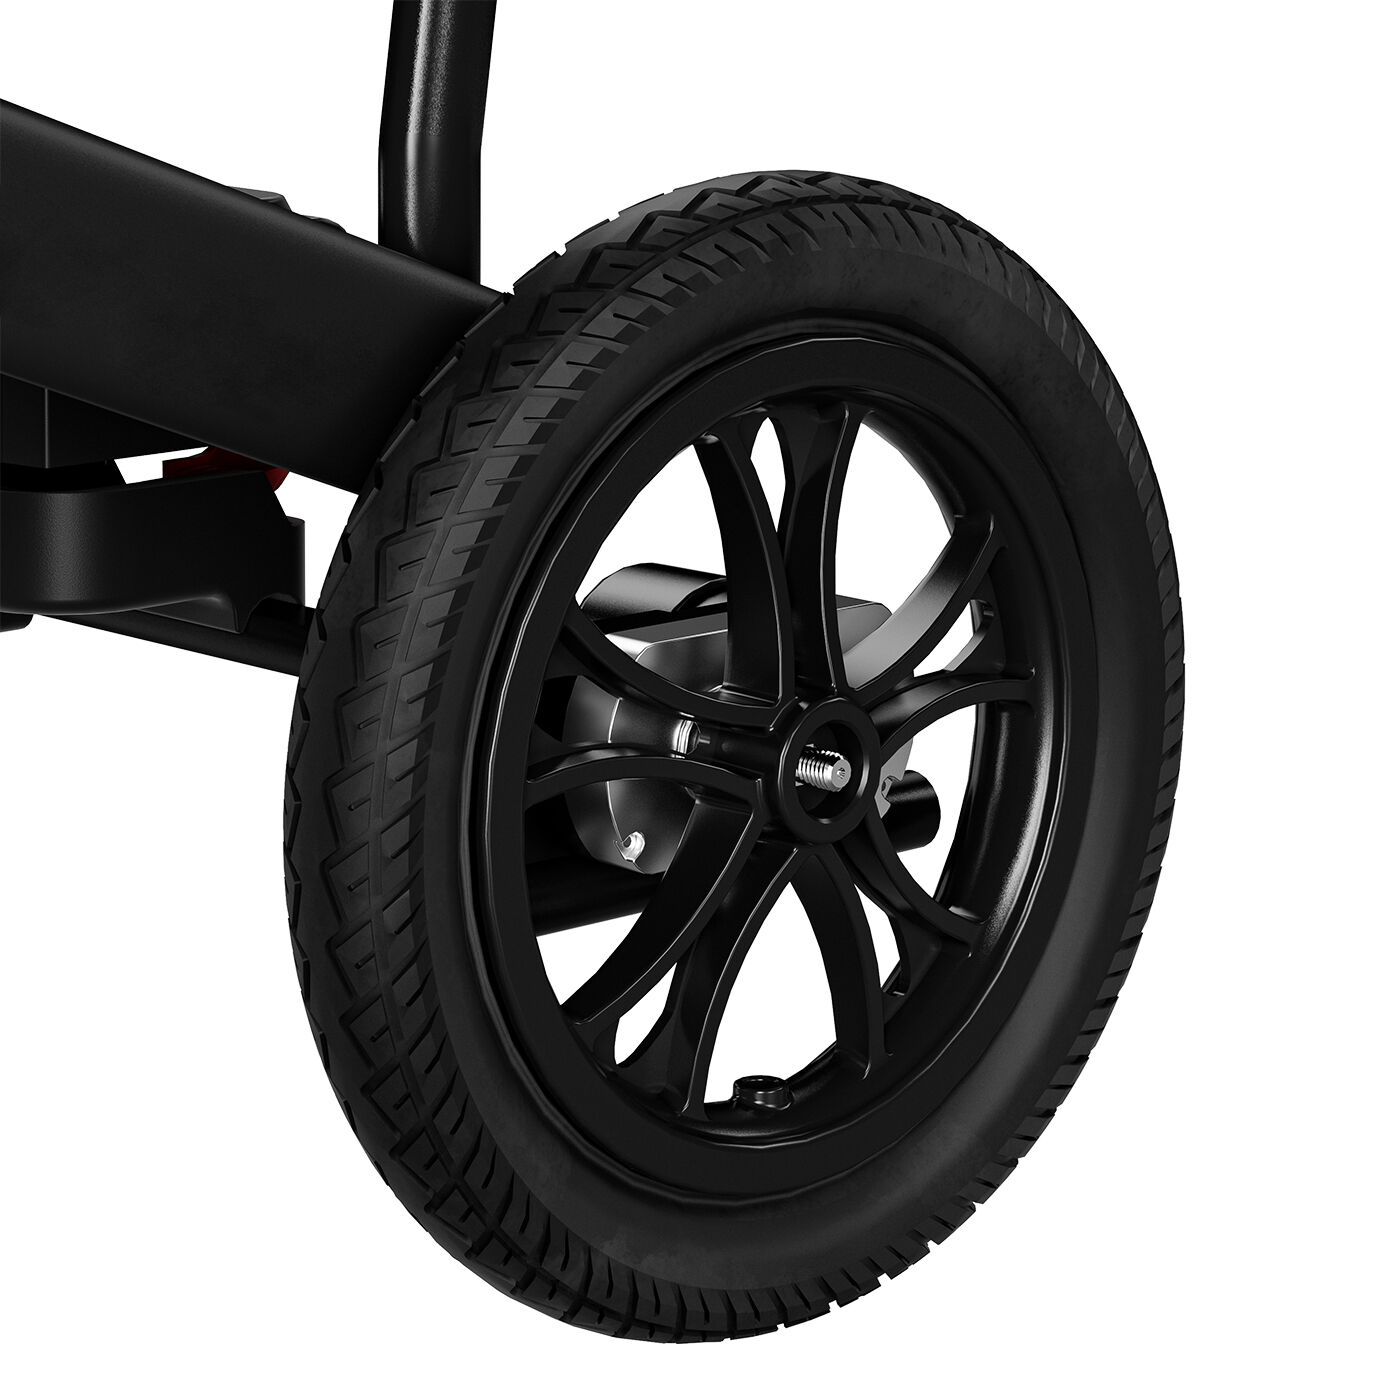 2023 Hot Sales Ultra Light Foldable Lightweight Lithium Battery Ganap na Auto Folding Luxury Carbon Fiber Electric Wheelchair